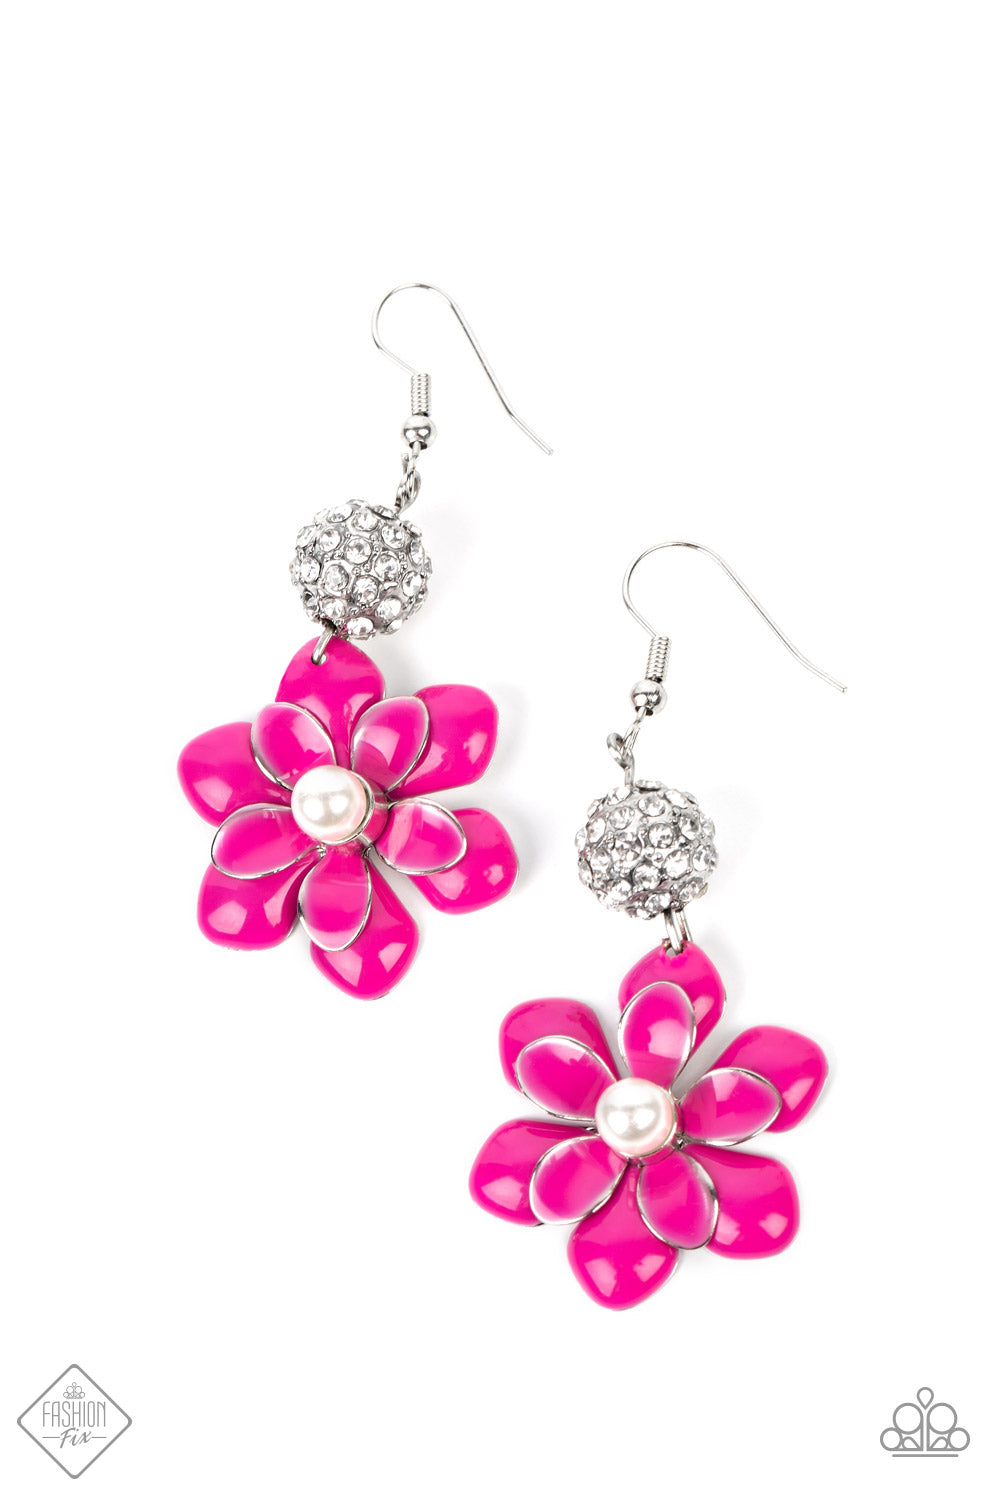 Bewitching Botany - Pink Flower Earrings - Paparazzi Accessories - A sparkle-infused silver bead anchors a bright pink flower with a white pearl drop center. The layers of petals are accented by subtle silver borders, highlighting the handcrafted features of the design. Earring attaches to a standard fishhook fitting. Sold as one pair of earrings.